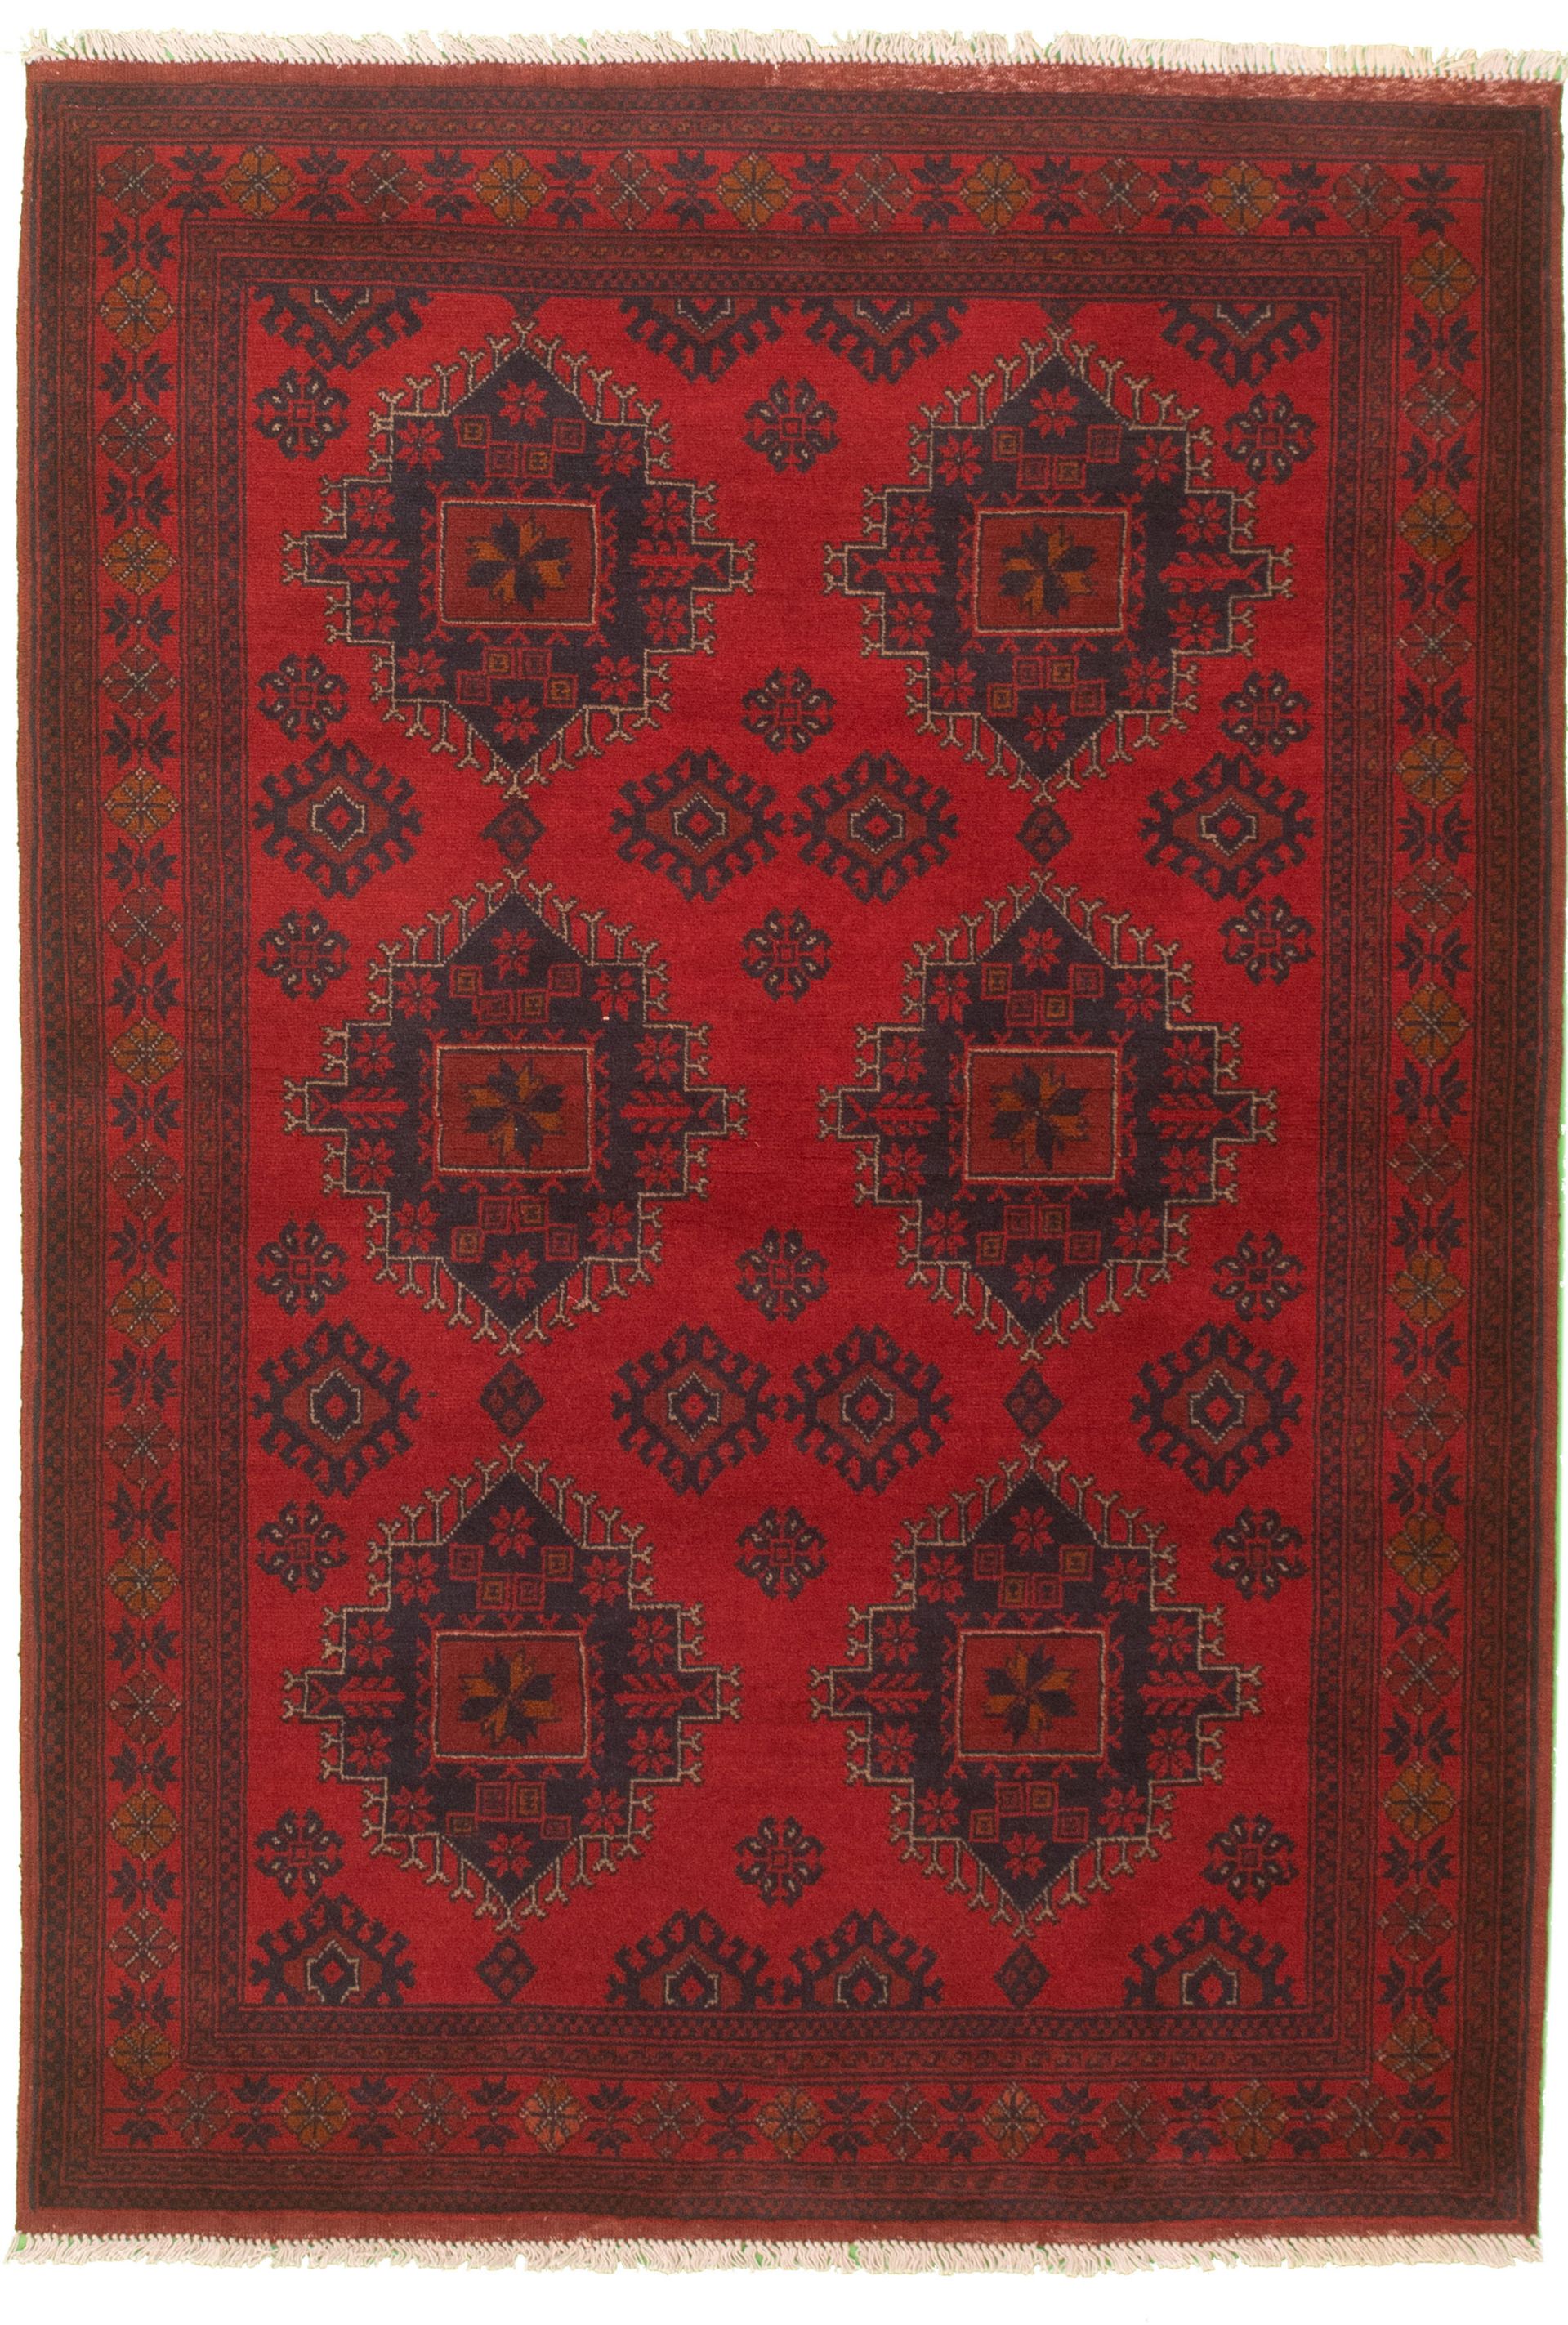 Hand-knotted Finest Khal Mohammadi Red Wool Rug 4'4" x 6'6" Size: 4'4" x 6'6"  